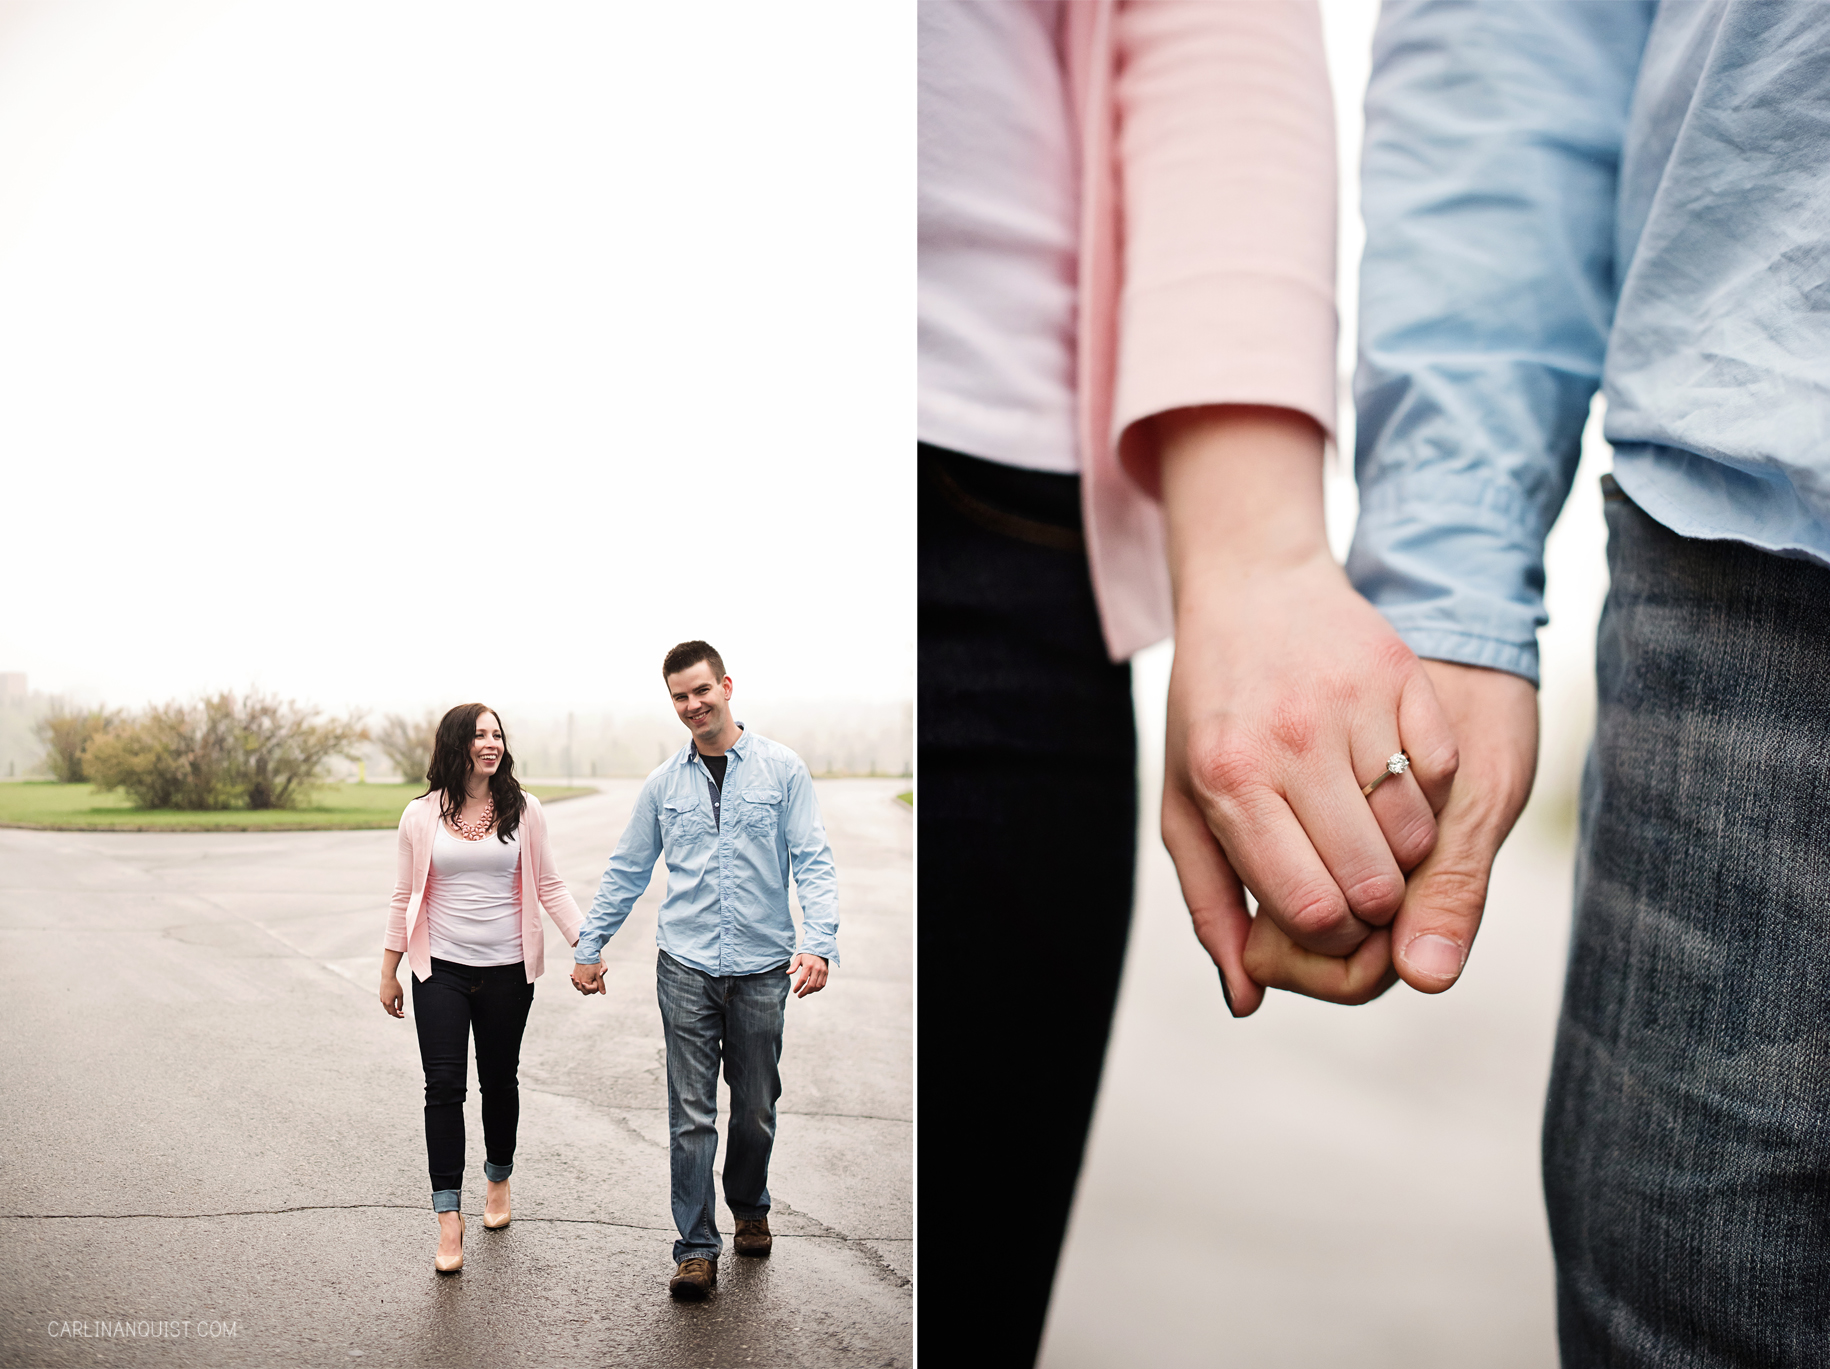 Spring Engagement | Calgary Wedding Photographer | Carlin Anquist Photography